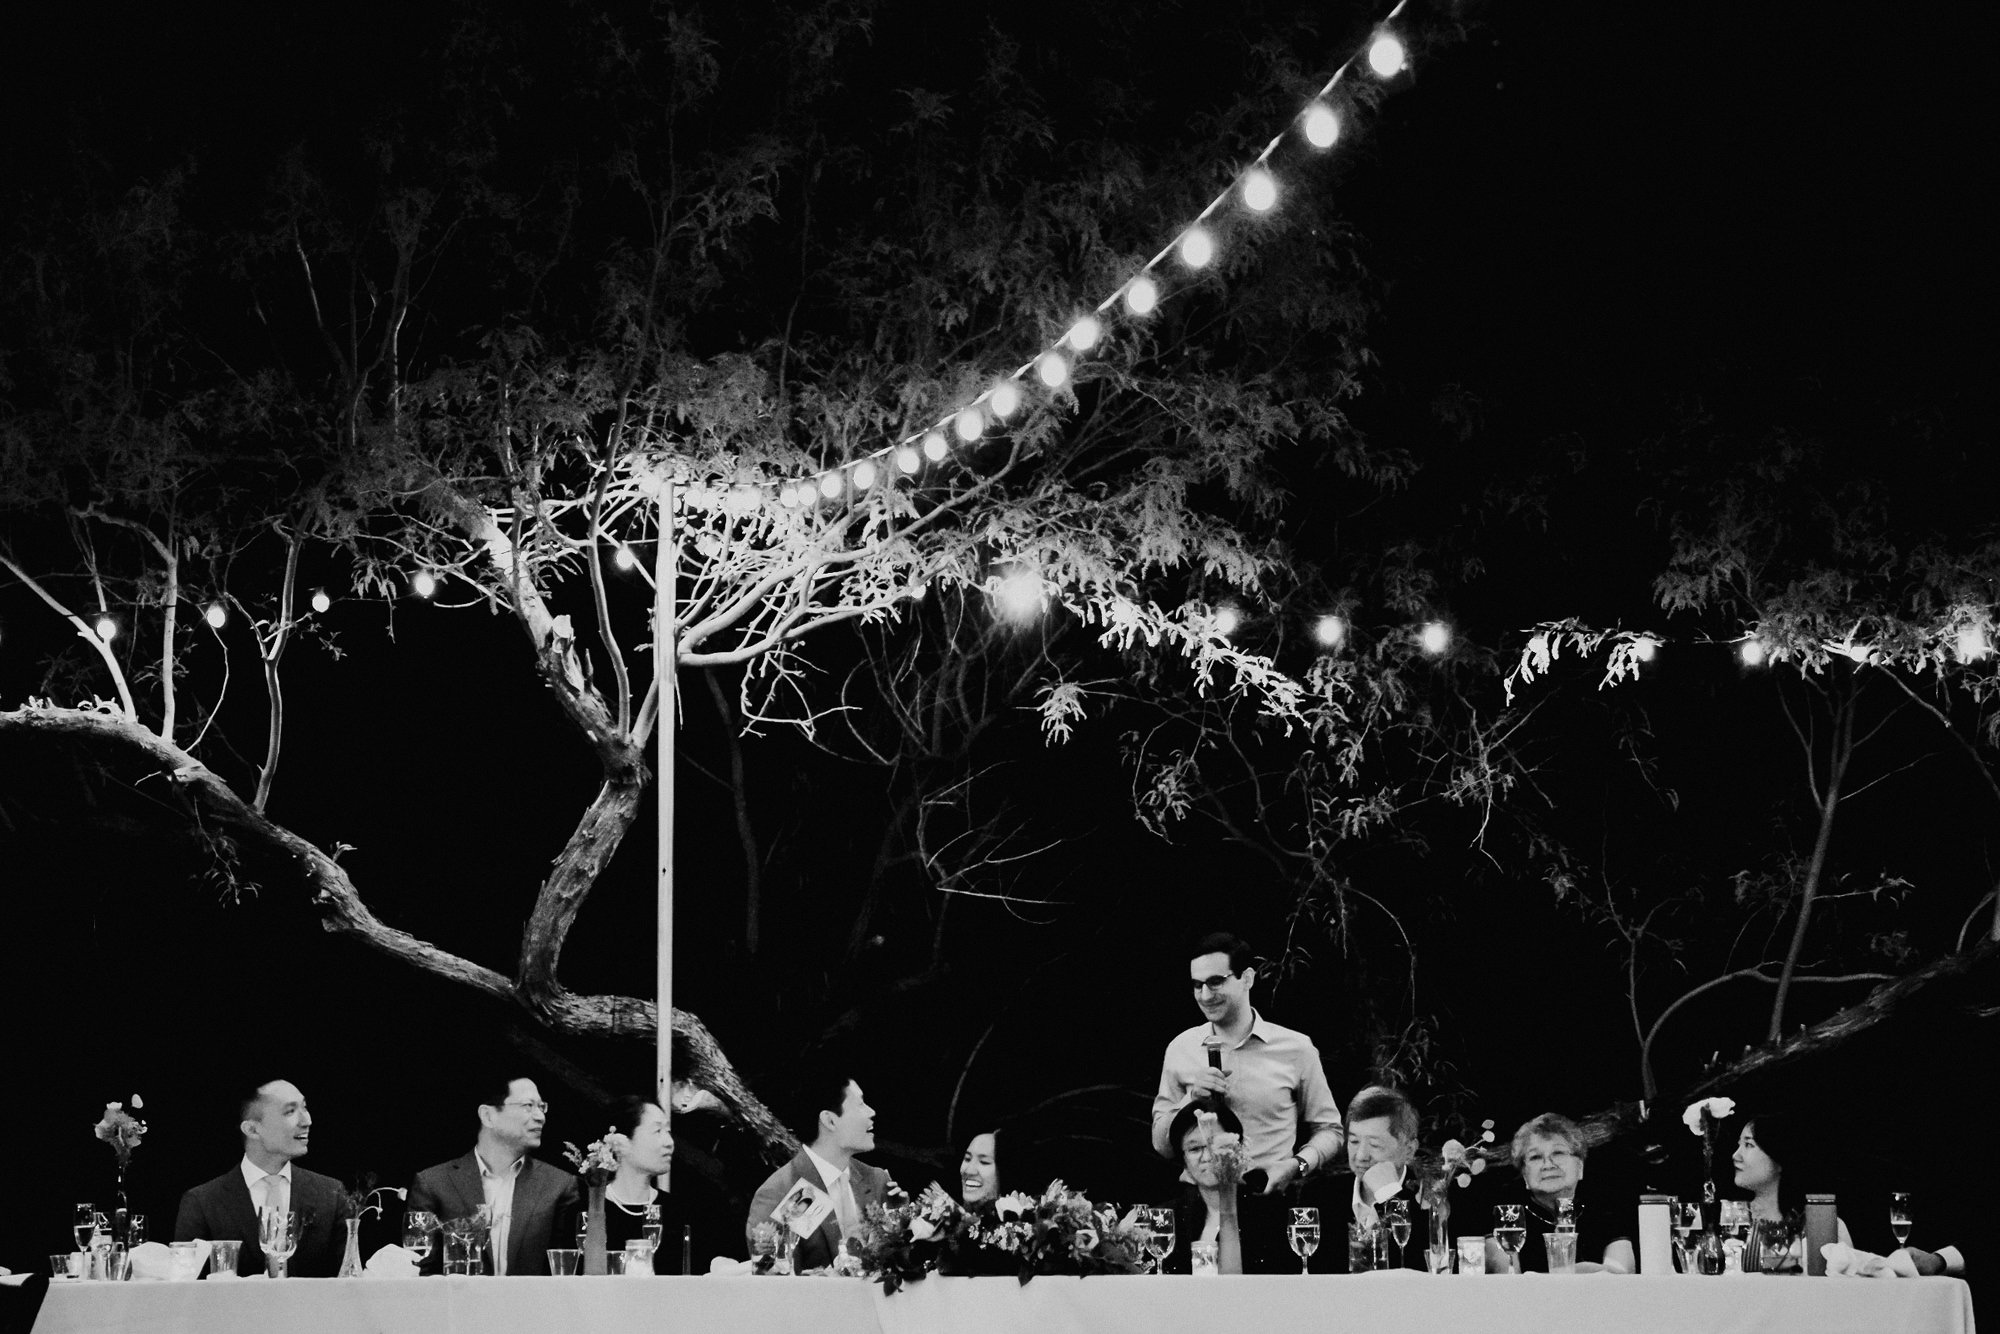 Saguaro Lake Guest Ranch The Perfect Location for a Laid-Back Fun-Filled Wedding. The best documentary wedding photographer Mantas Kubilinskas-51.jpg